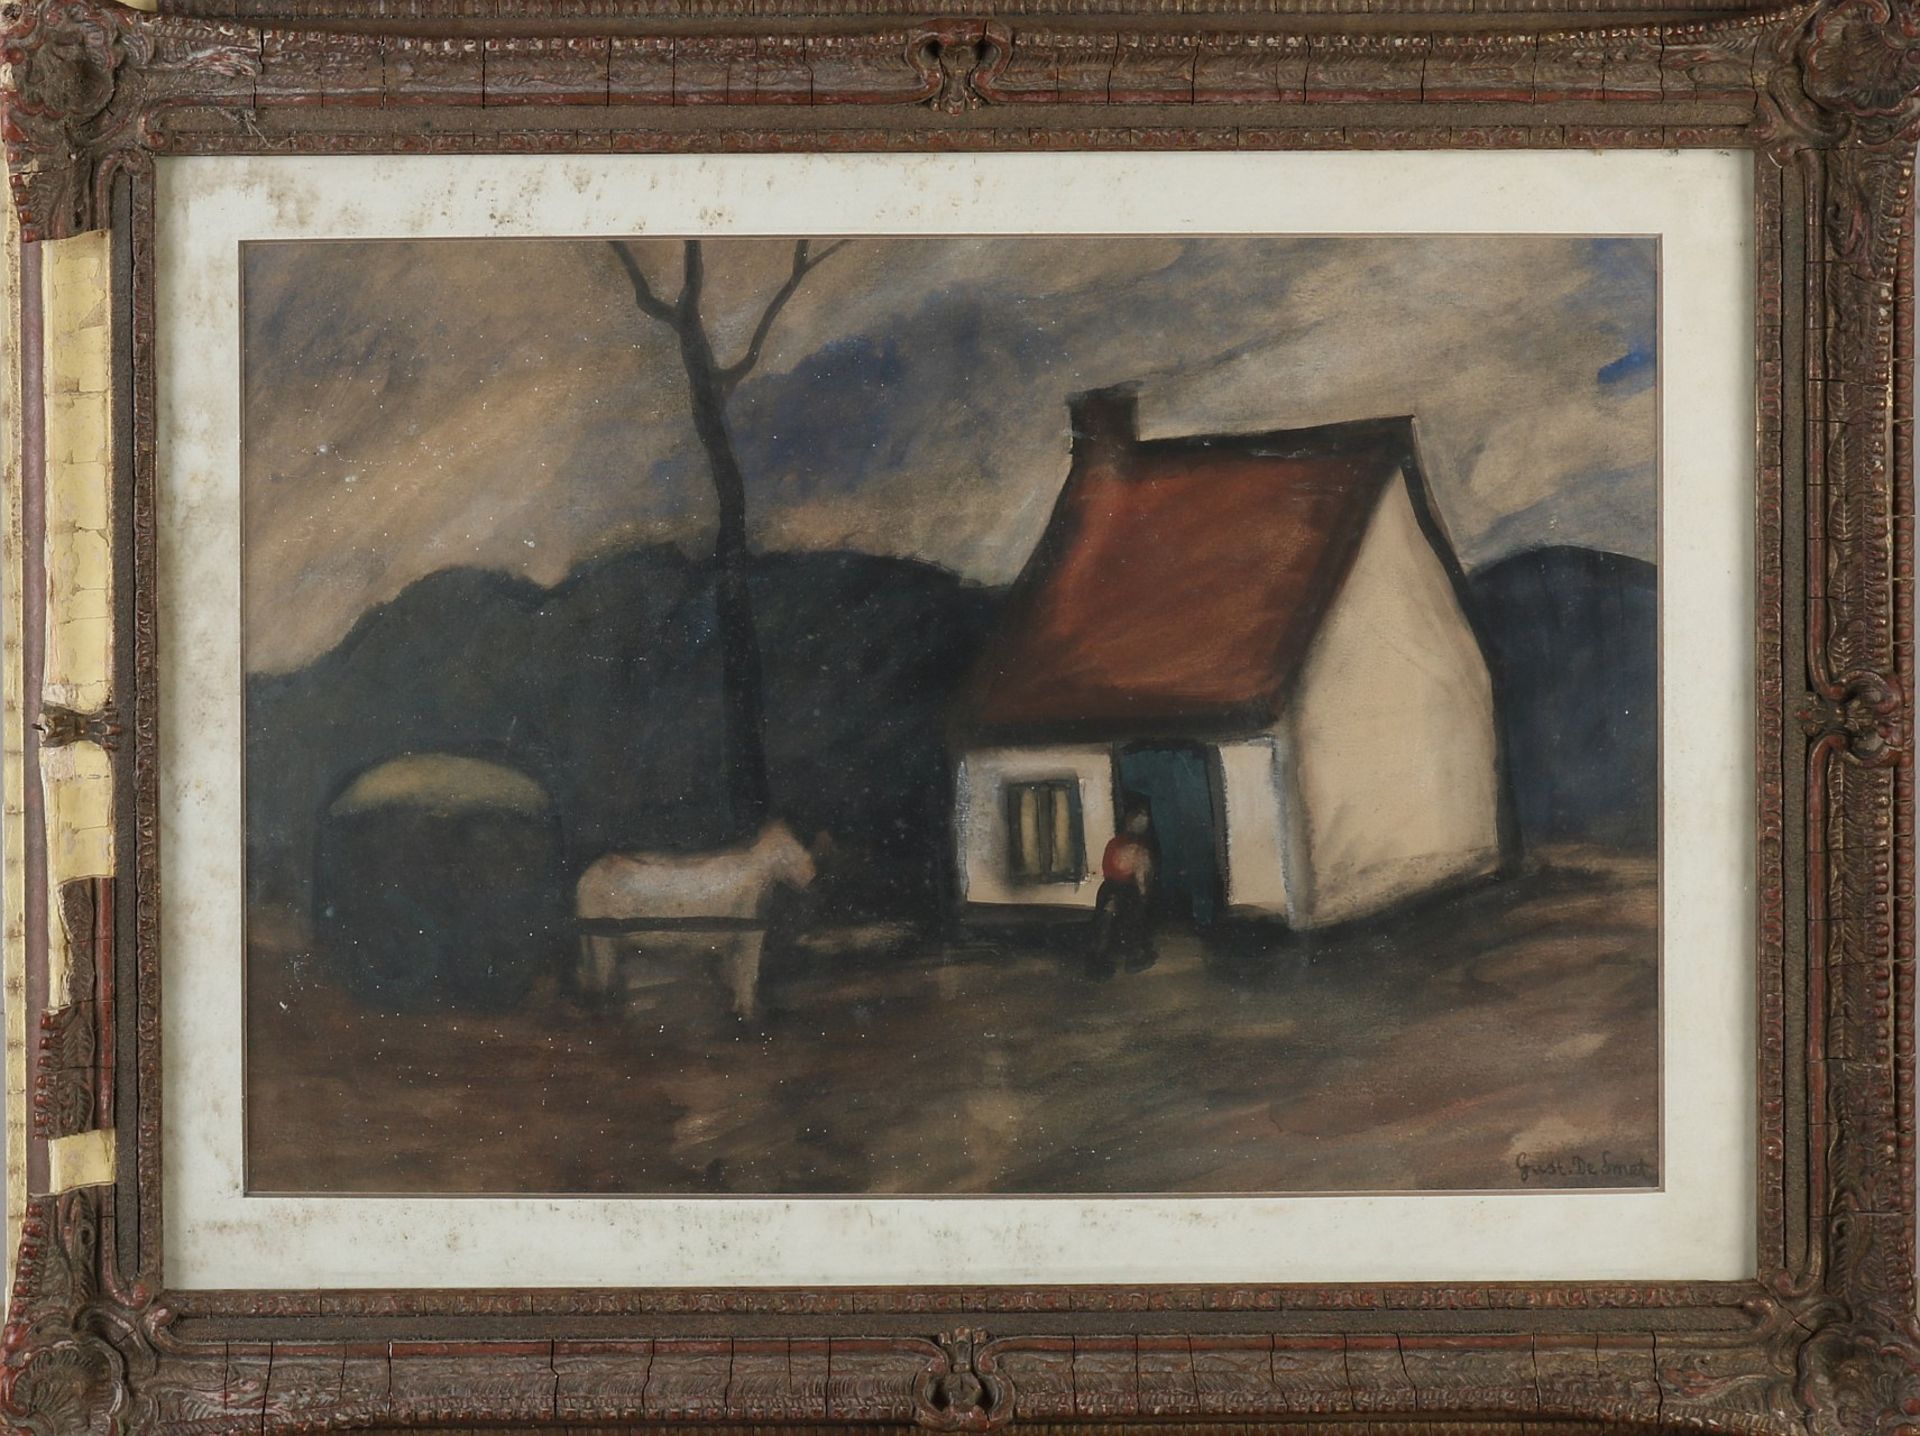 Gustave de Smet, Farmhouse with horse and figures